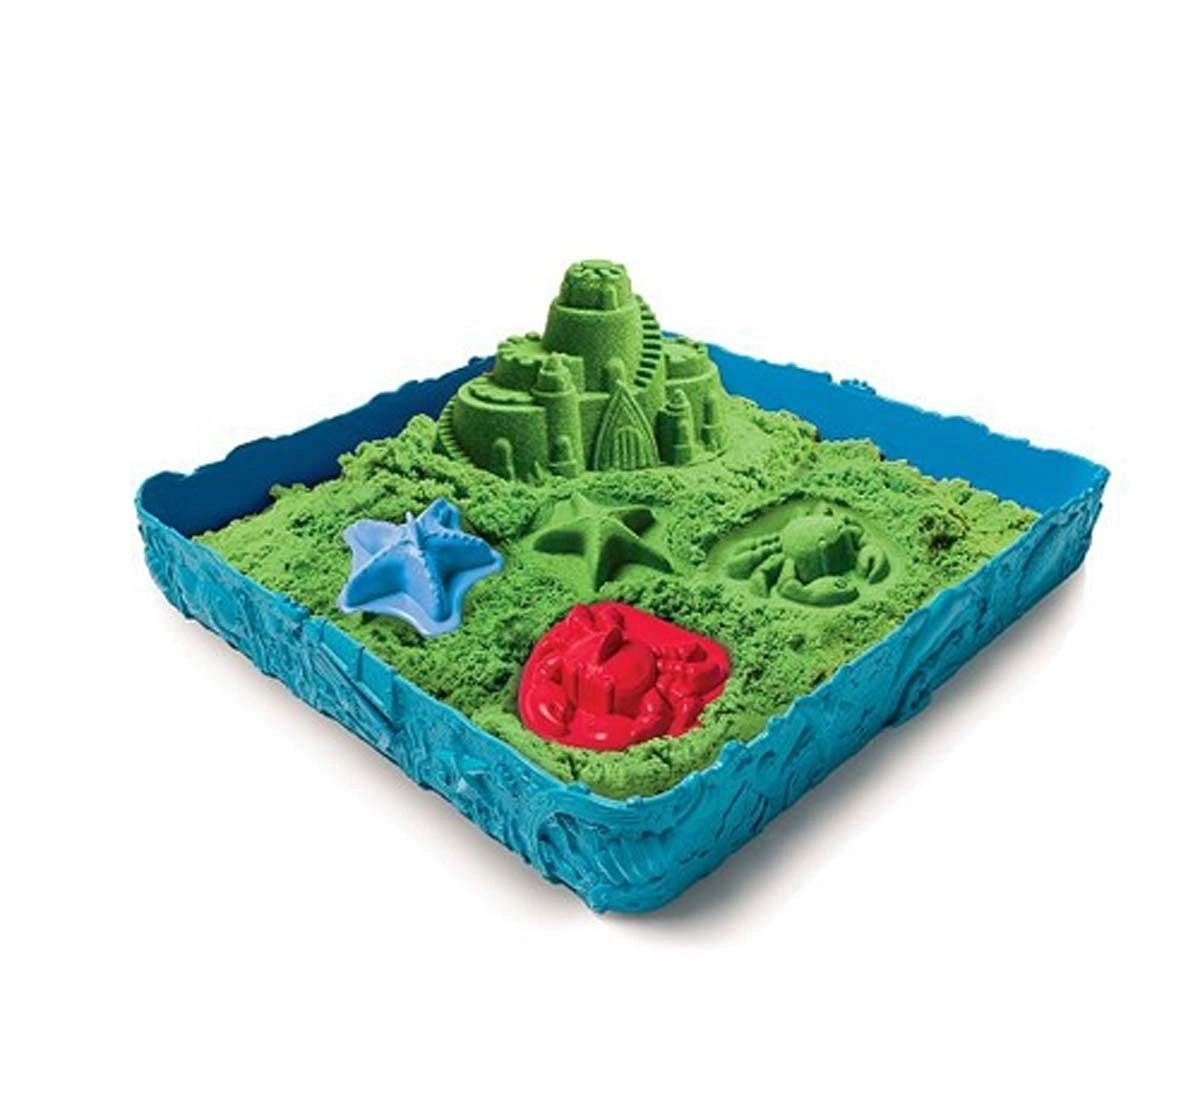 Kinetic Sand Box And Mold Set, Multi Color Sand, Slime & Others for Kids age 4Y+ 